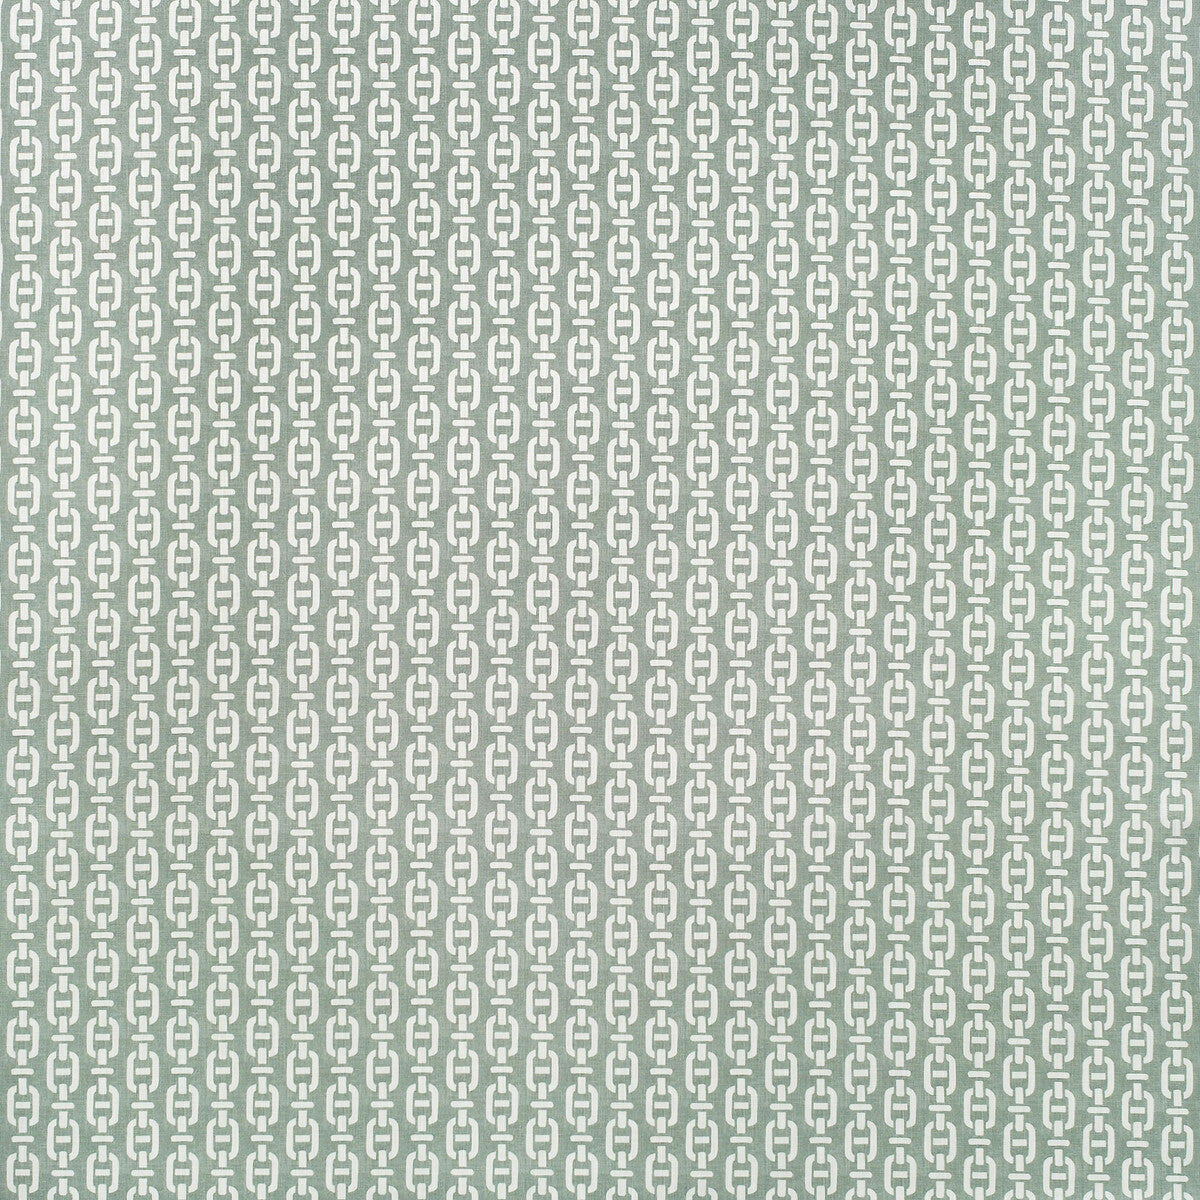 Burlington Outdoor fabric in celadon color - pattern AM100387.315.0 - by Kravet Couture in the Andrew Martin Sophie Patterson Outdoor collection